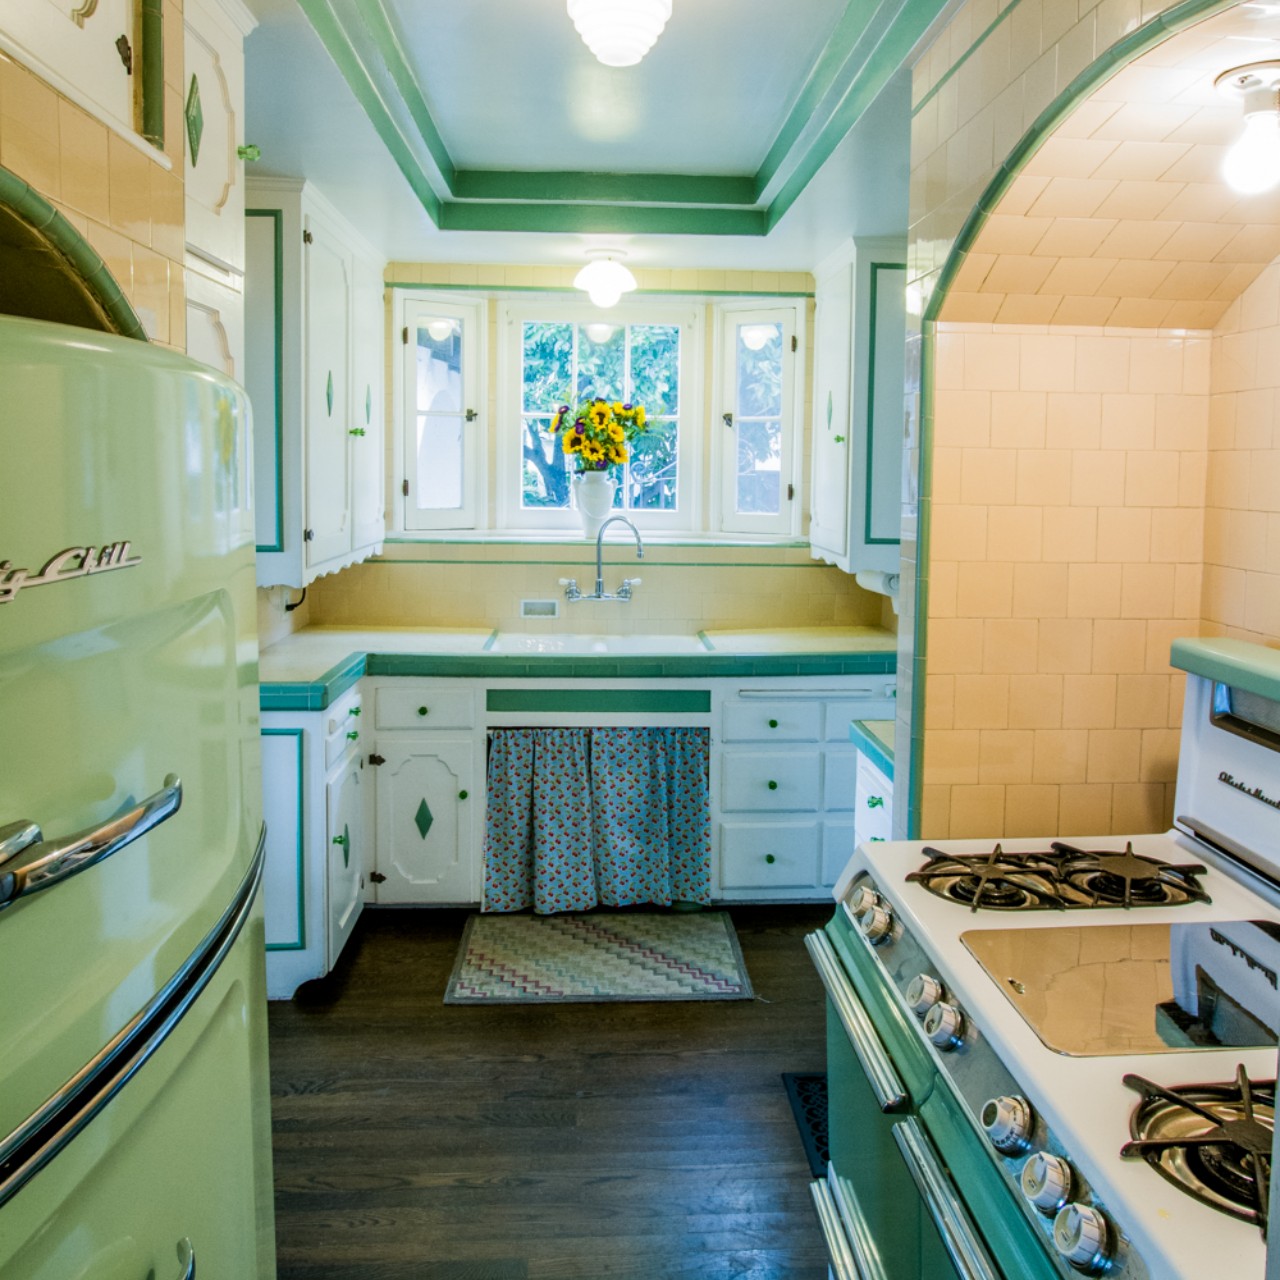 A Vintage Retro Kitchen With Pastel-Colored Appliances And A Refrigerator  Ai Generated Art